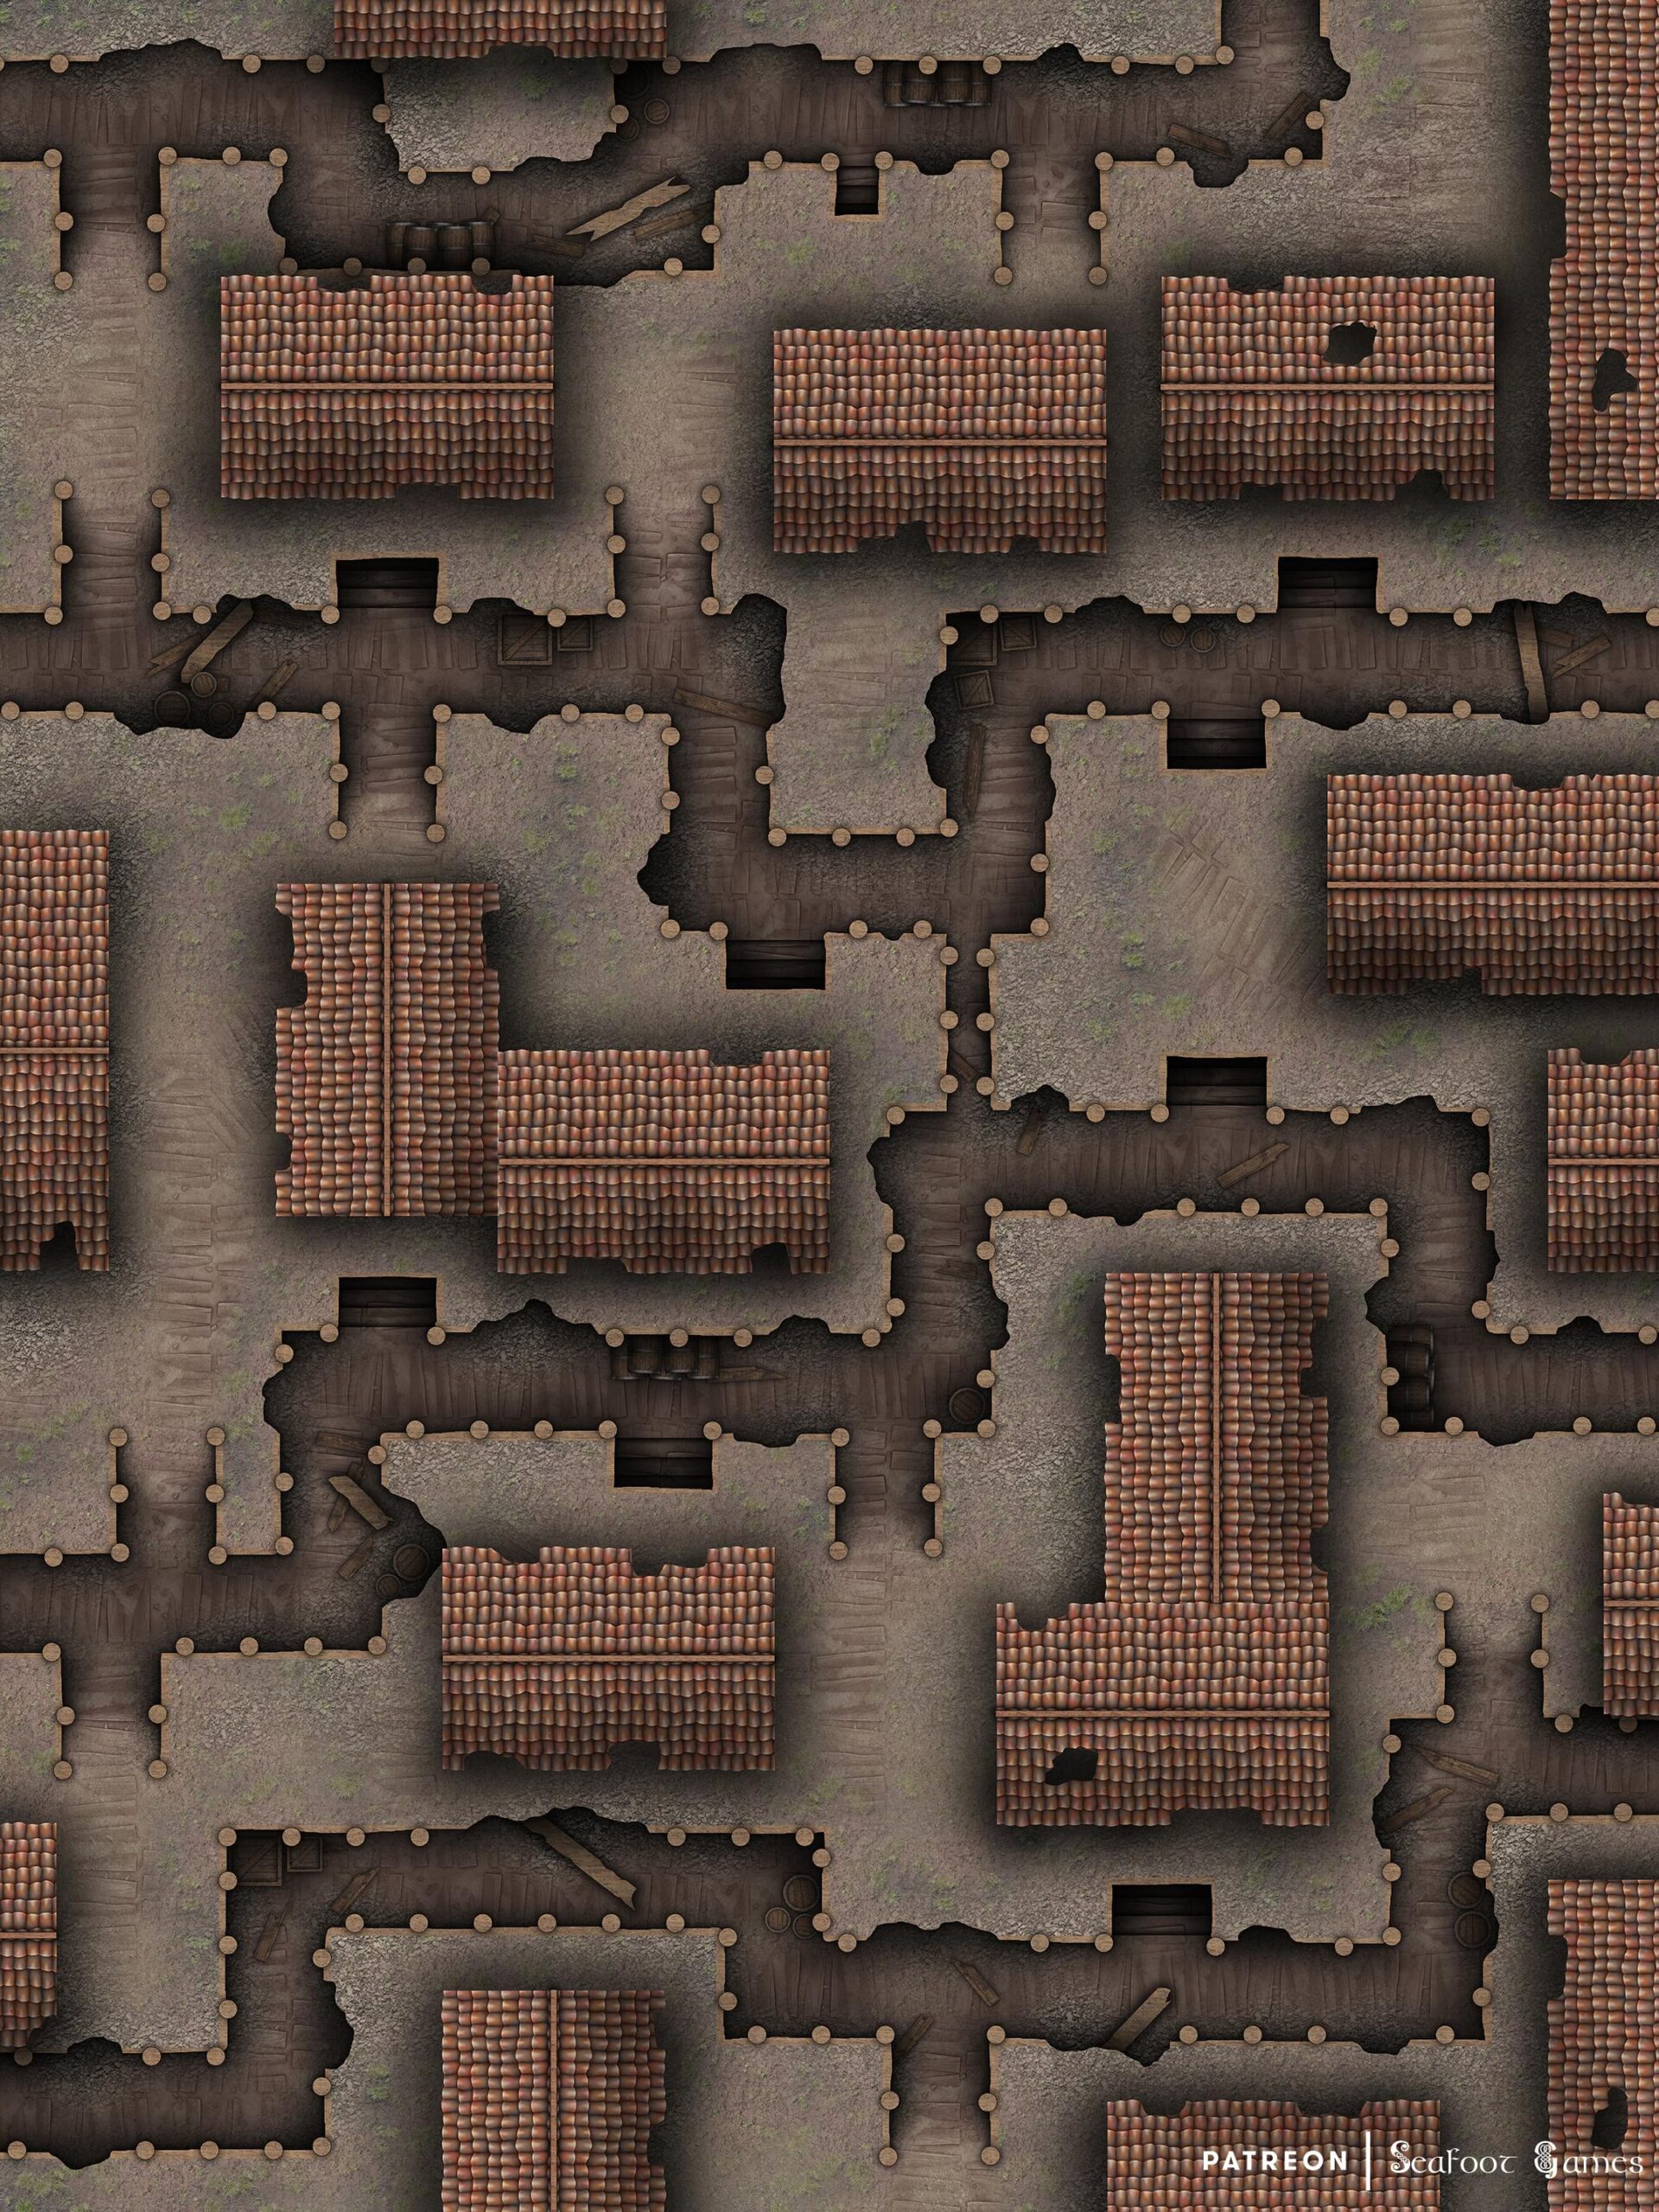 Level 1 of our Abandoned Wartorn Town Thieves Dens Free 40x30 Multi-Level Battlemap & Adventure, featuring a journey to the shadowrealm to save knowledge. VTT ready!